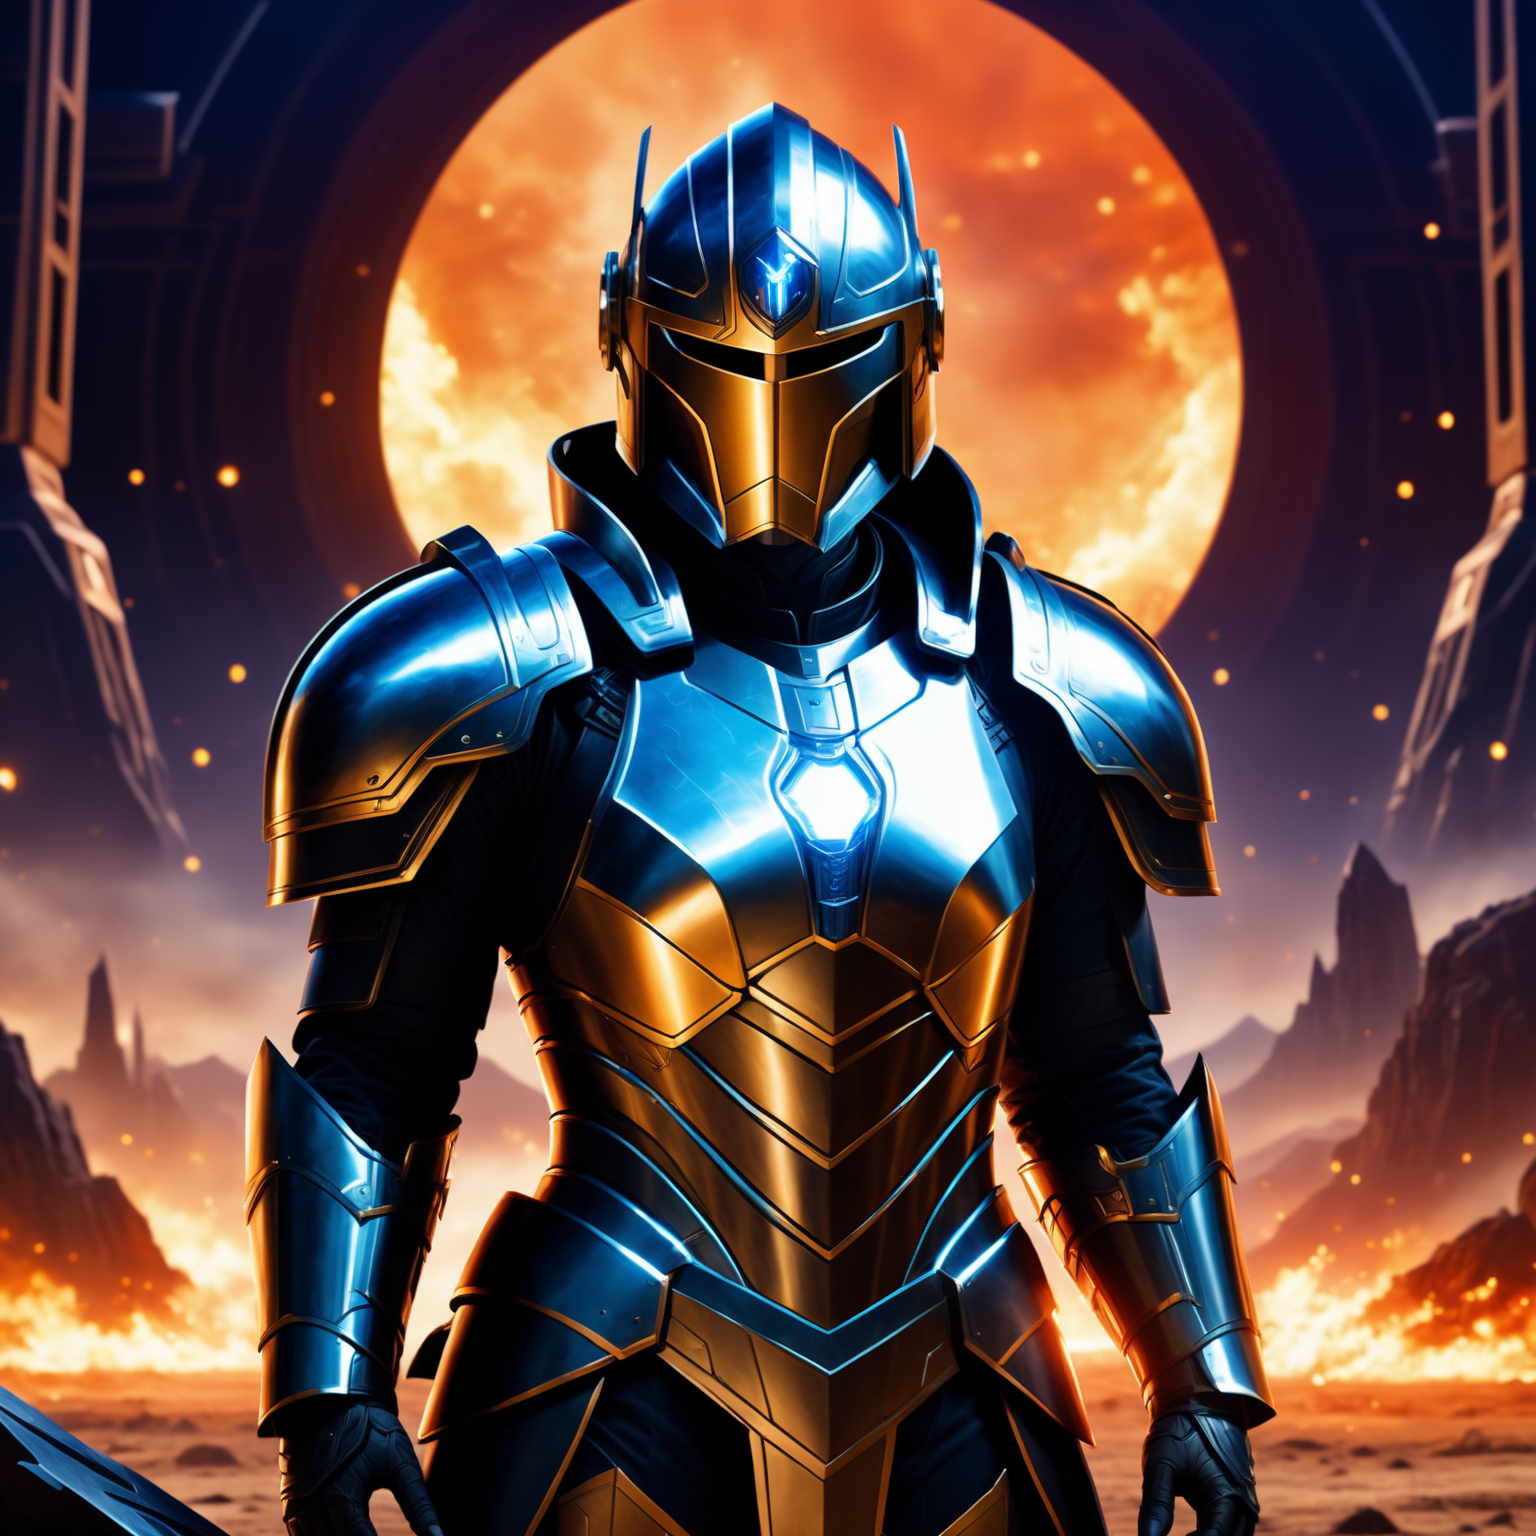 Quantum Knight, clad in armor embedded with quantum circuits, stands before a chaotic battlefield. The scene captures the ...